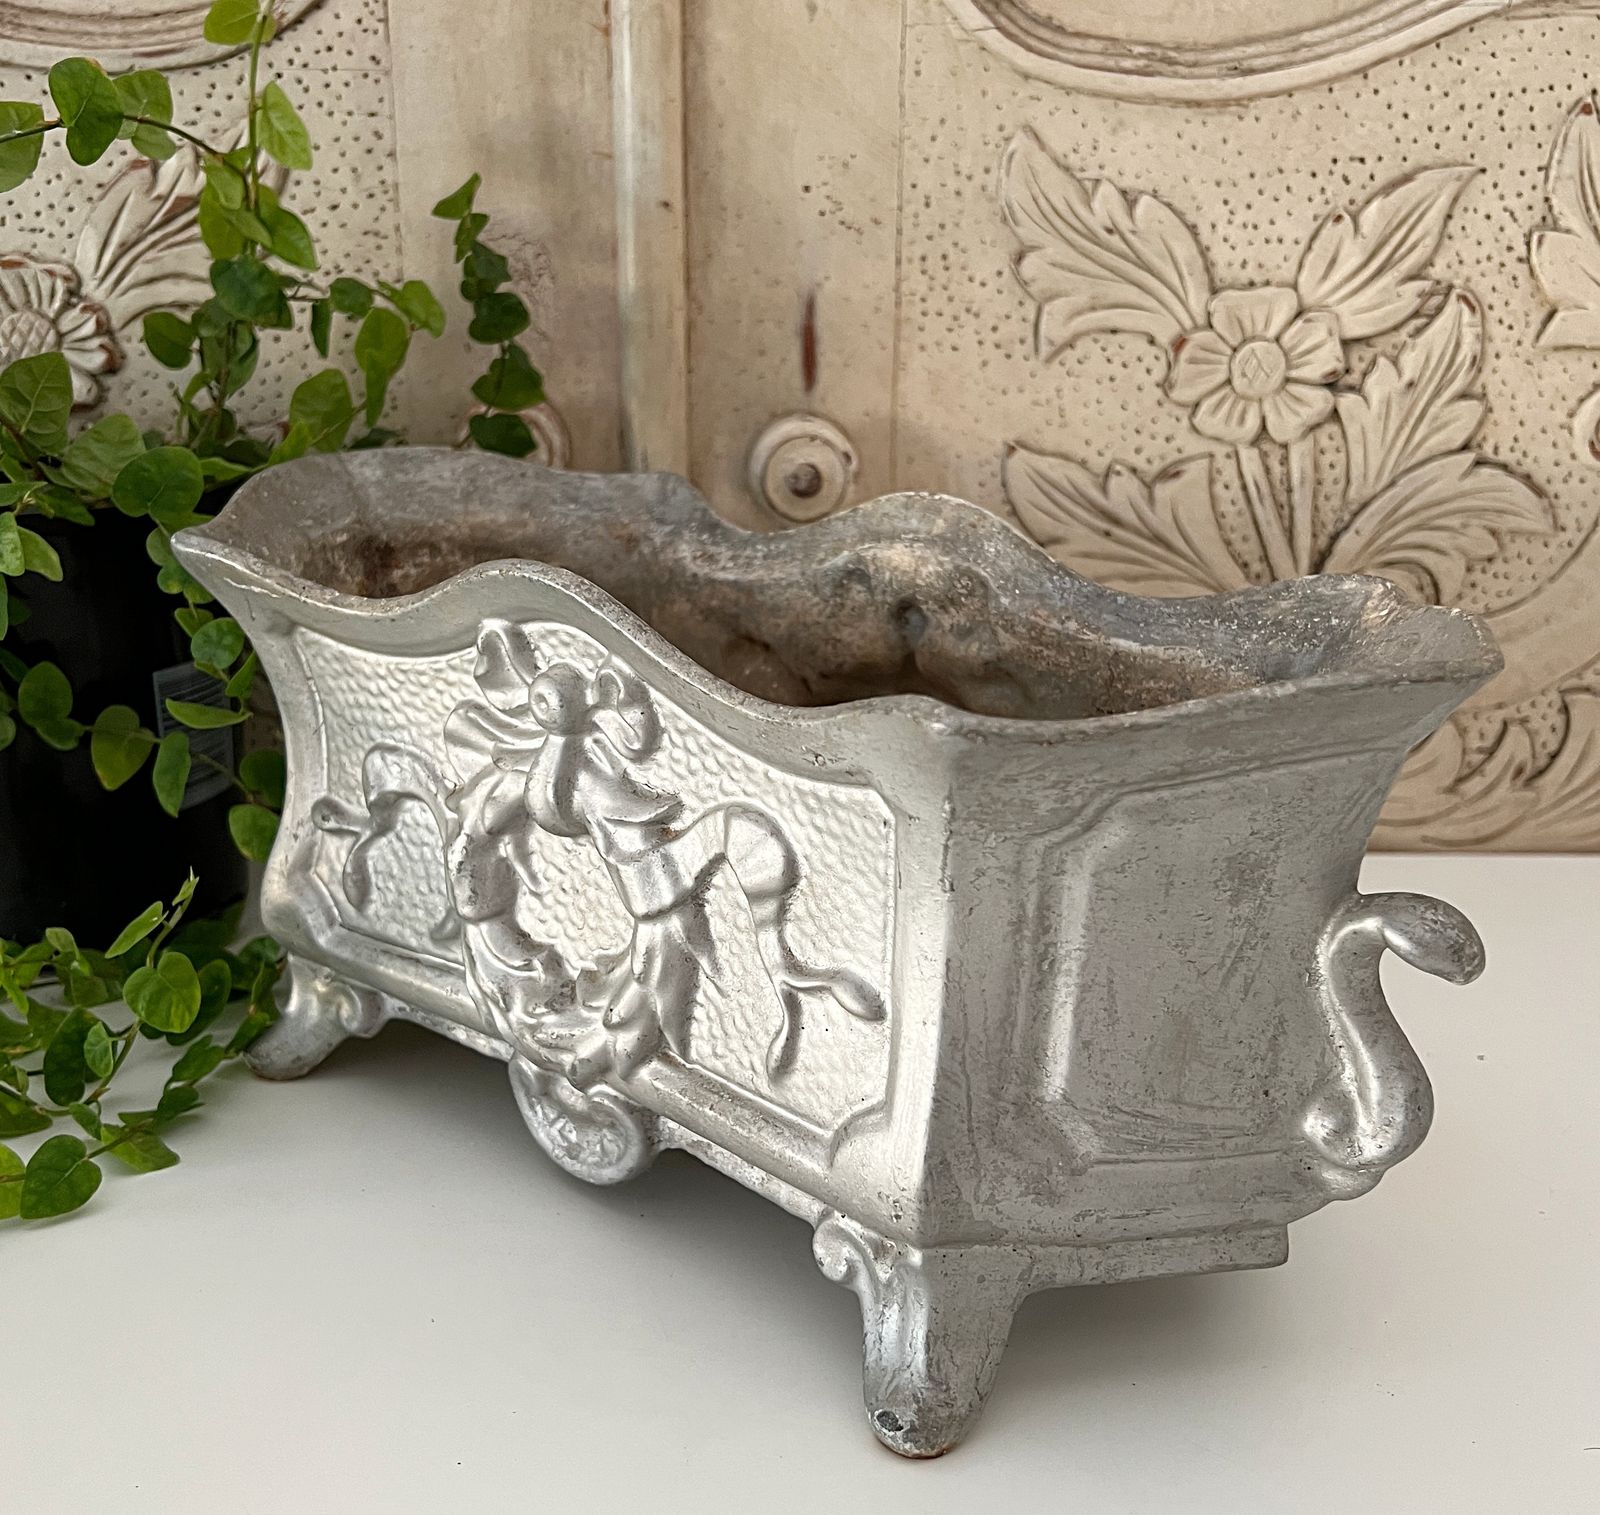 Antique French Iron Table Jardiniere Planter Box Painted Silver - FR679   detail 02